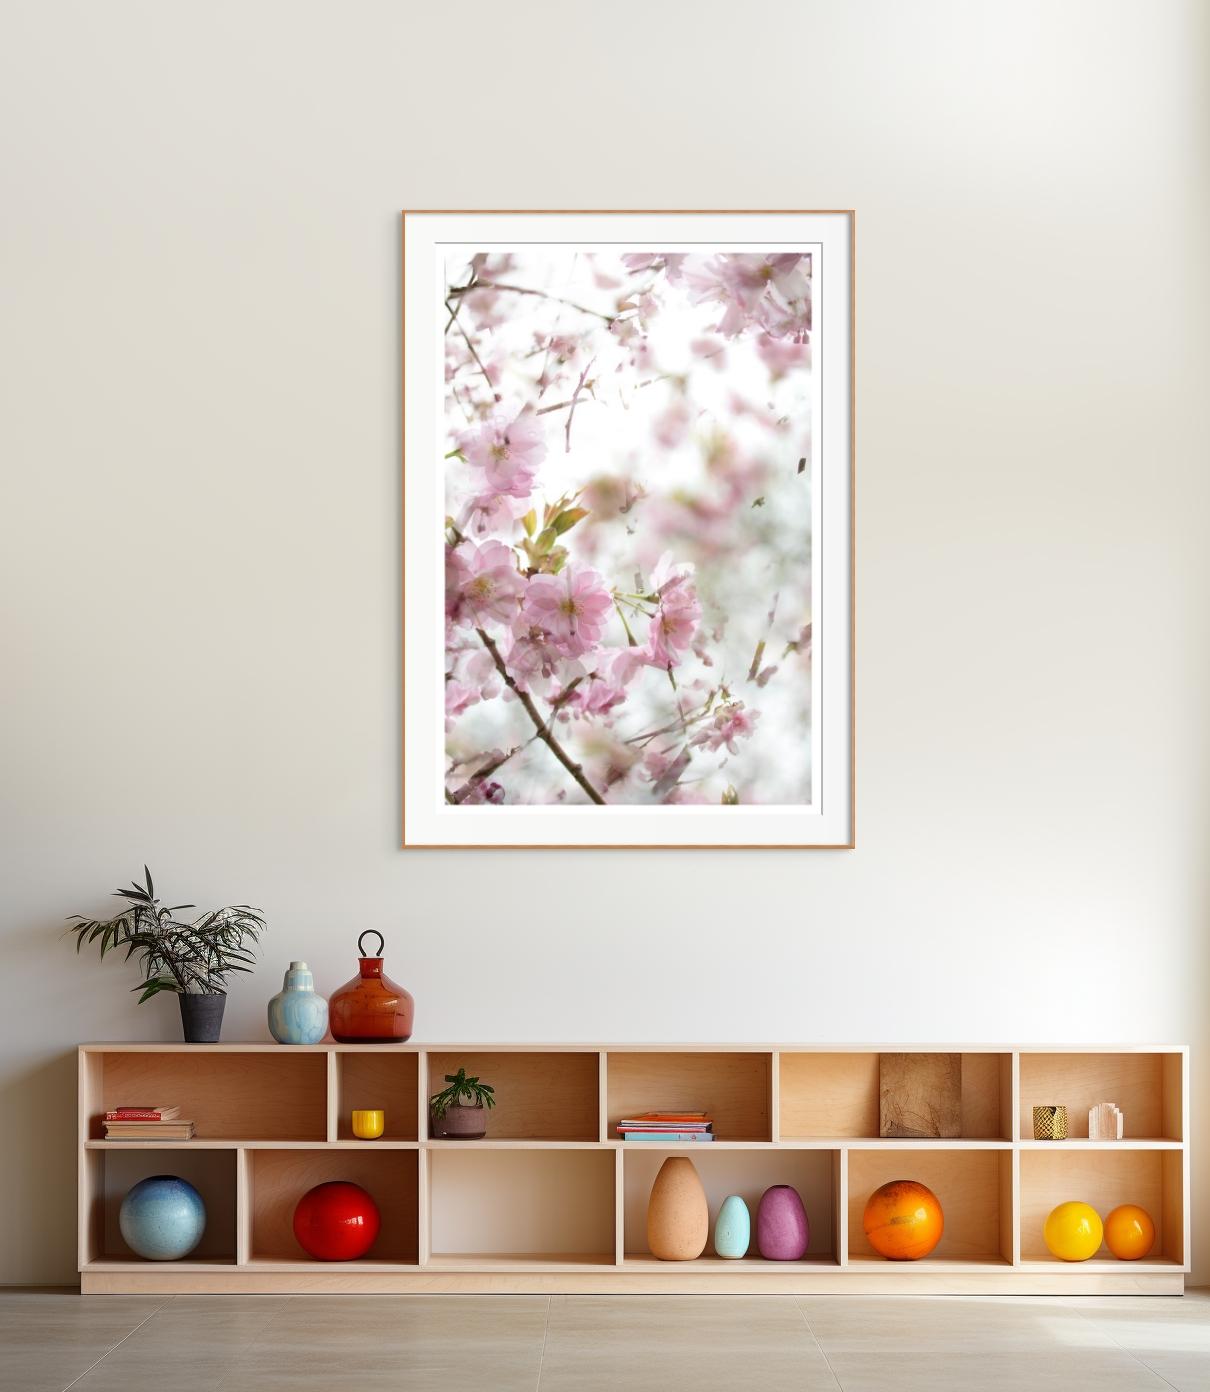 'The Optimism of Spring' Large Scale Photo Cherry blossom Sakura flowers pink For Sale 1